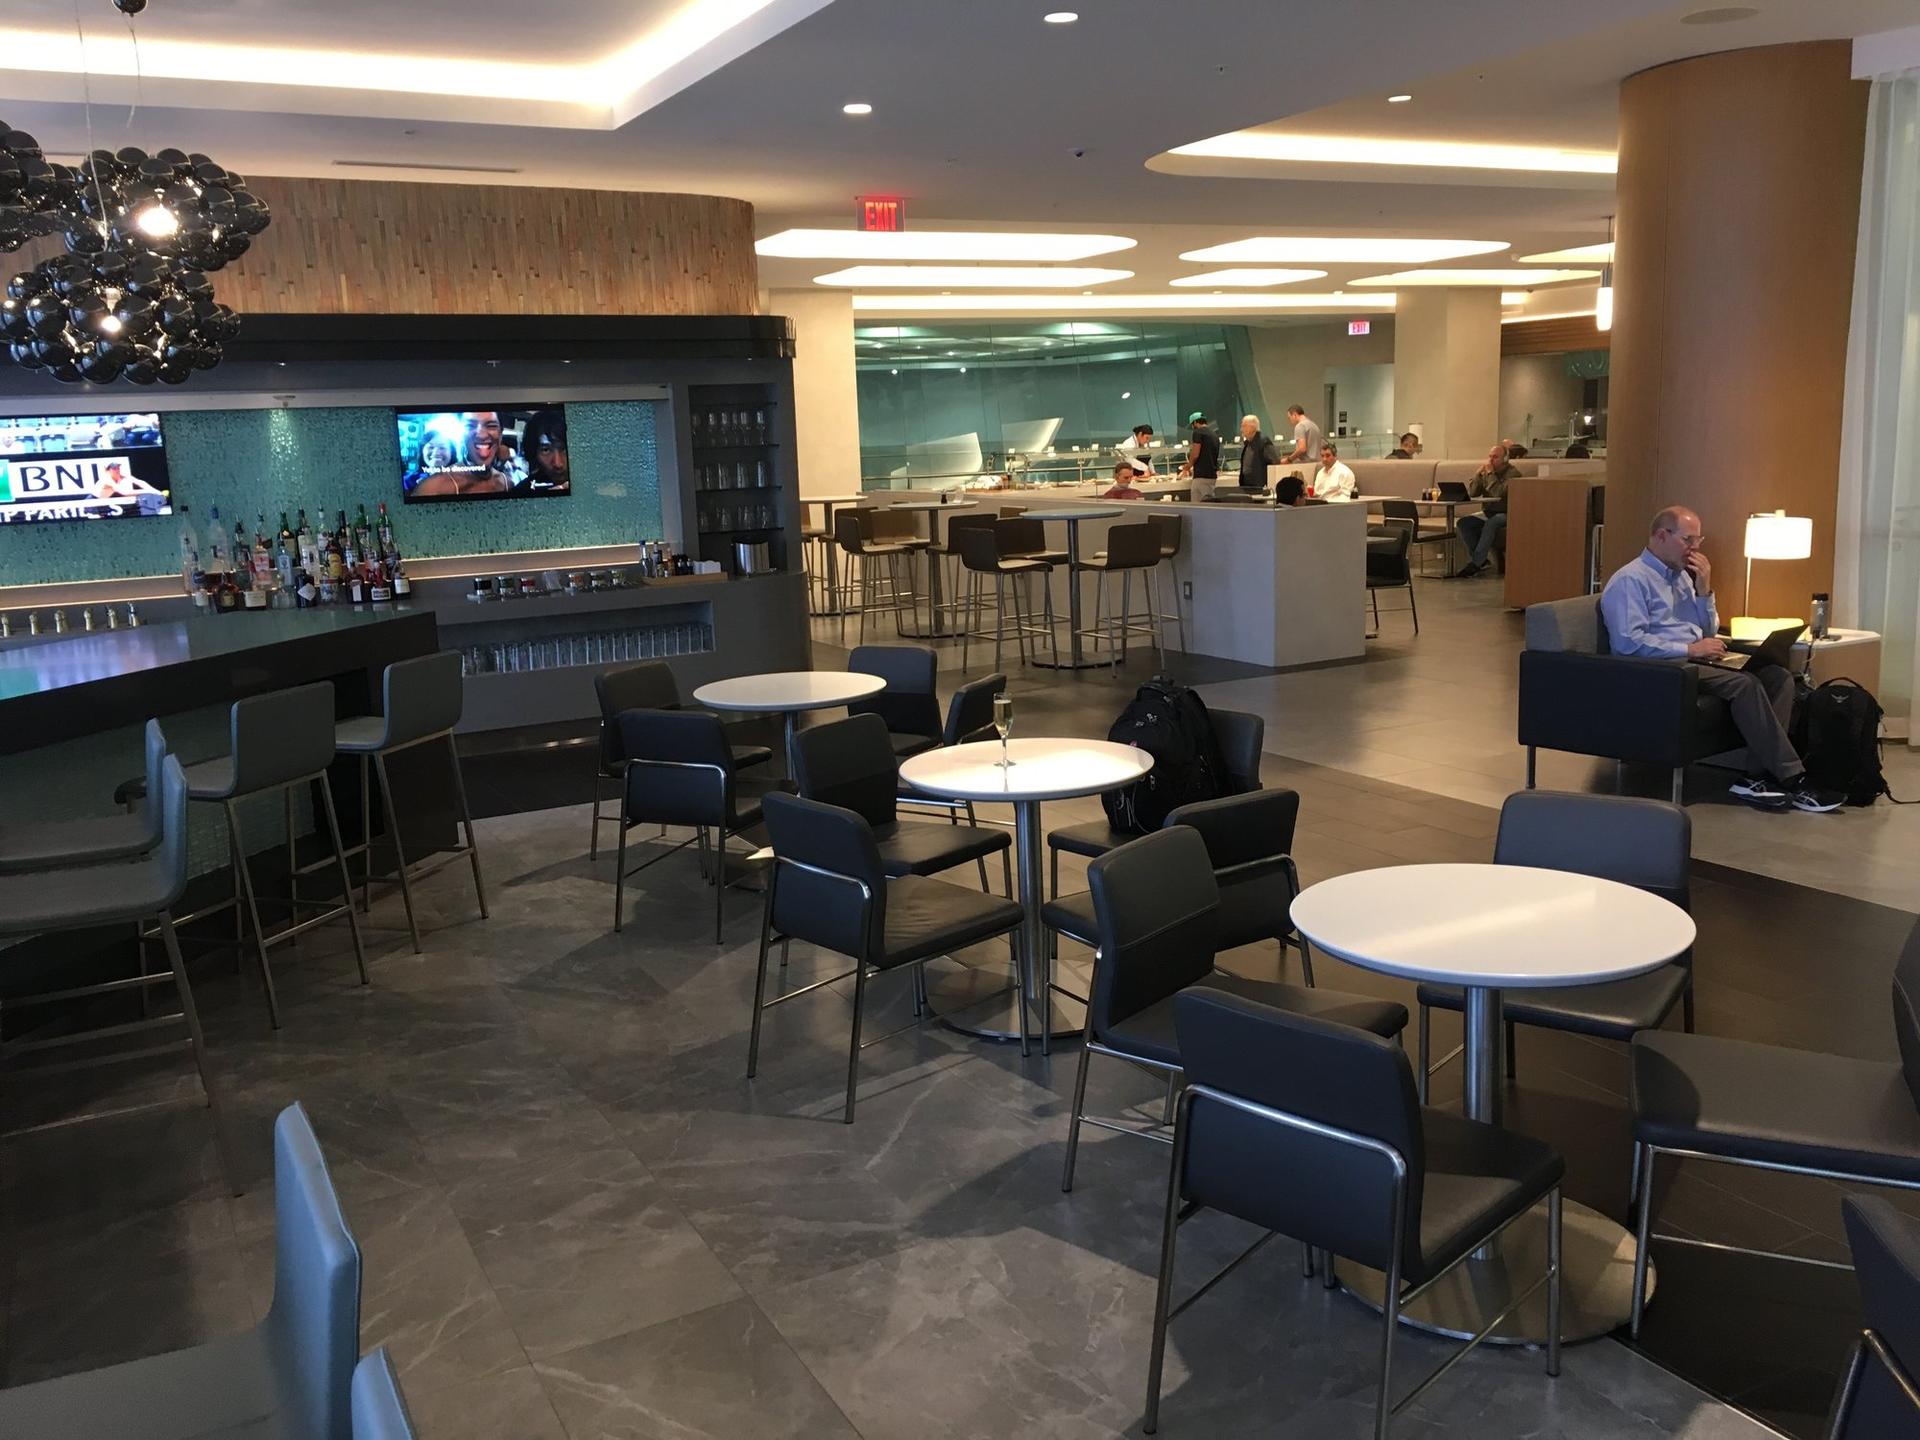 American Airlines Flagship Lounge image 37 of 65